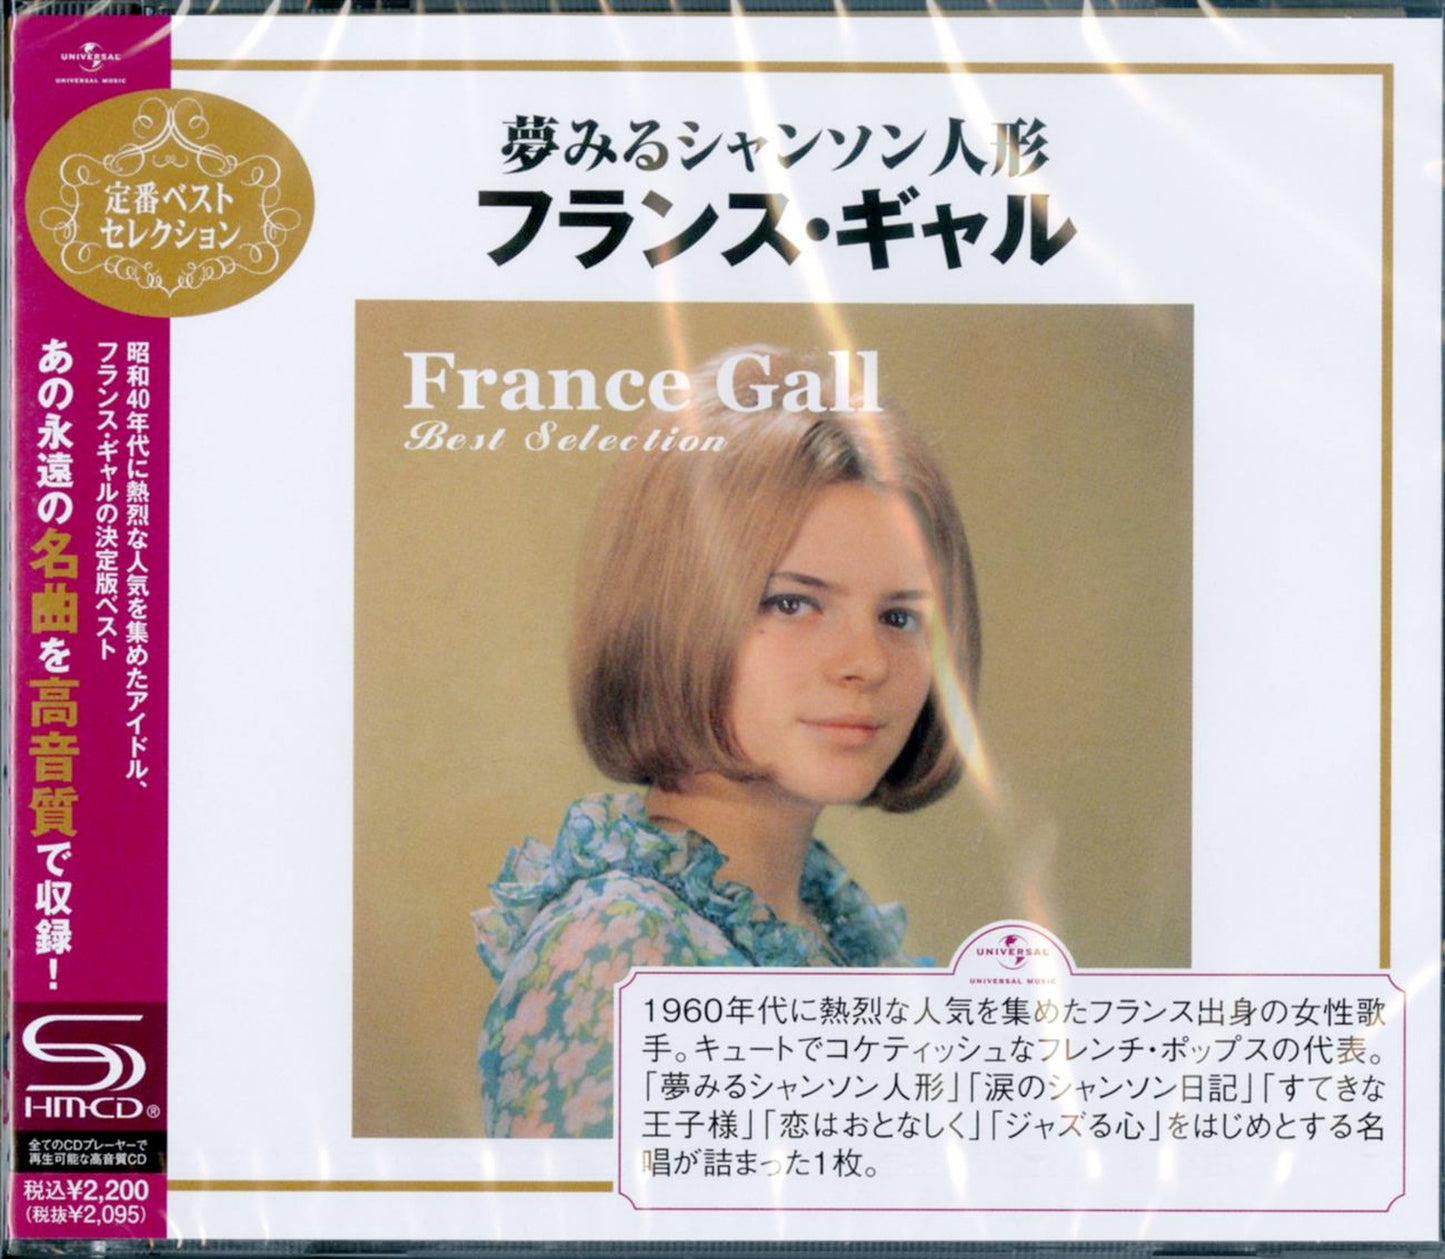 France Gall - France Gall Best Selection - Japan  SHM-CD